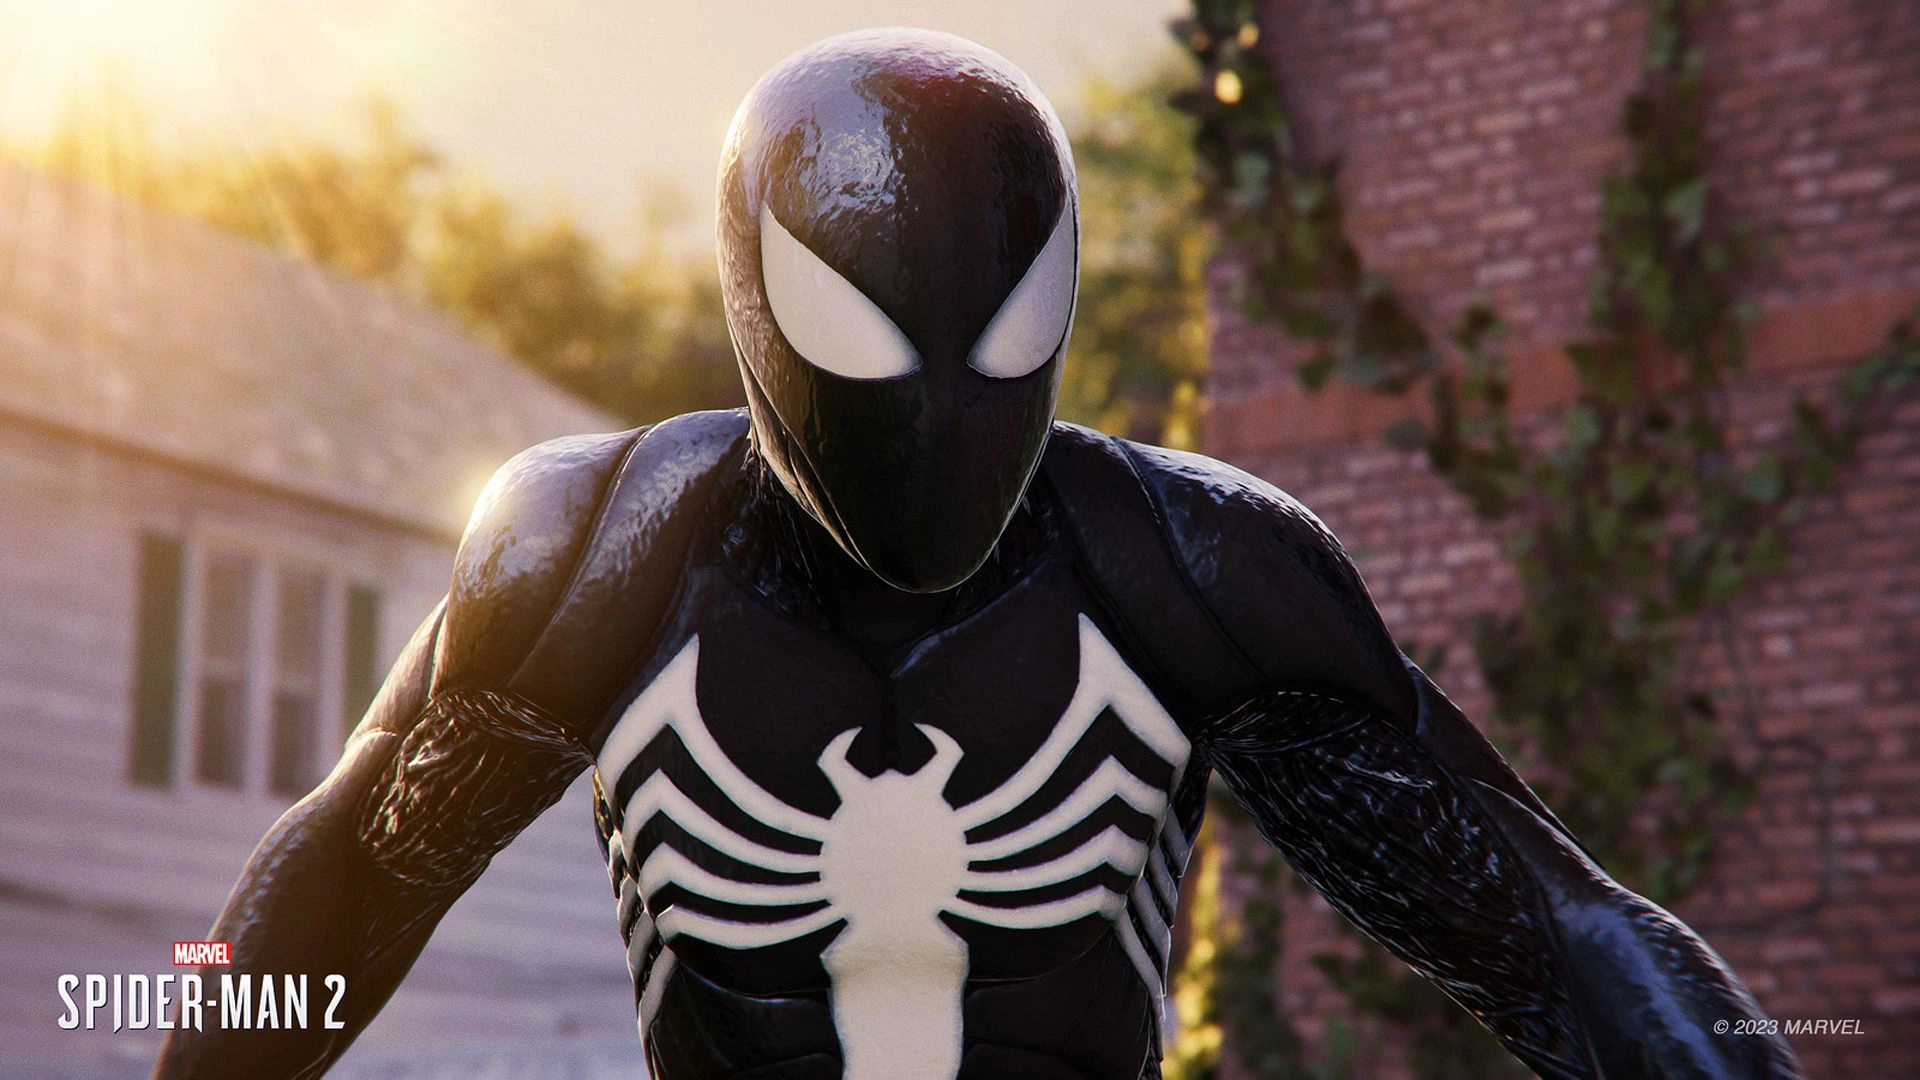 Insomniac Promises to Retain Fan-Favorite Features in Spider-Man 2